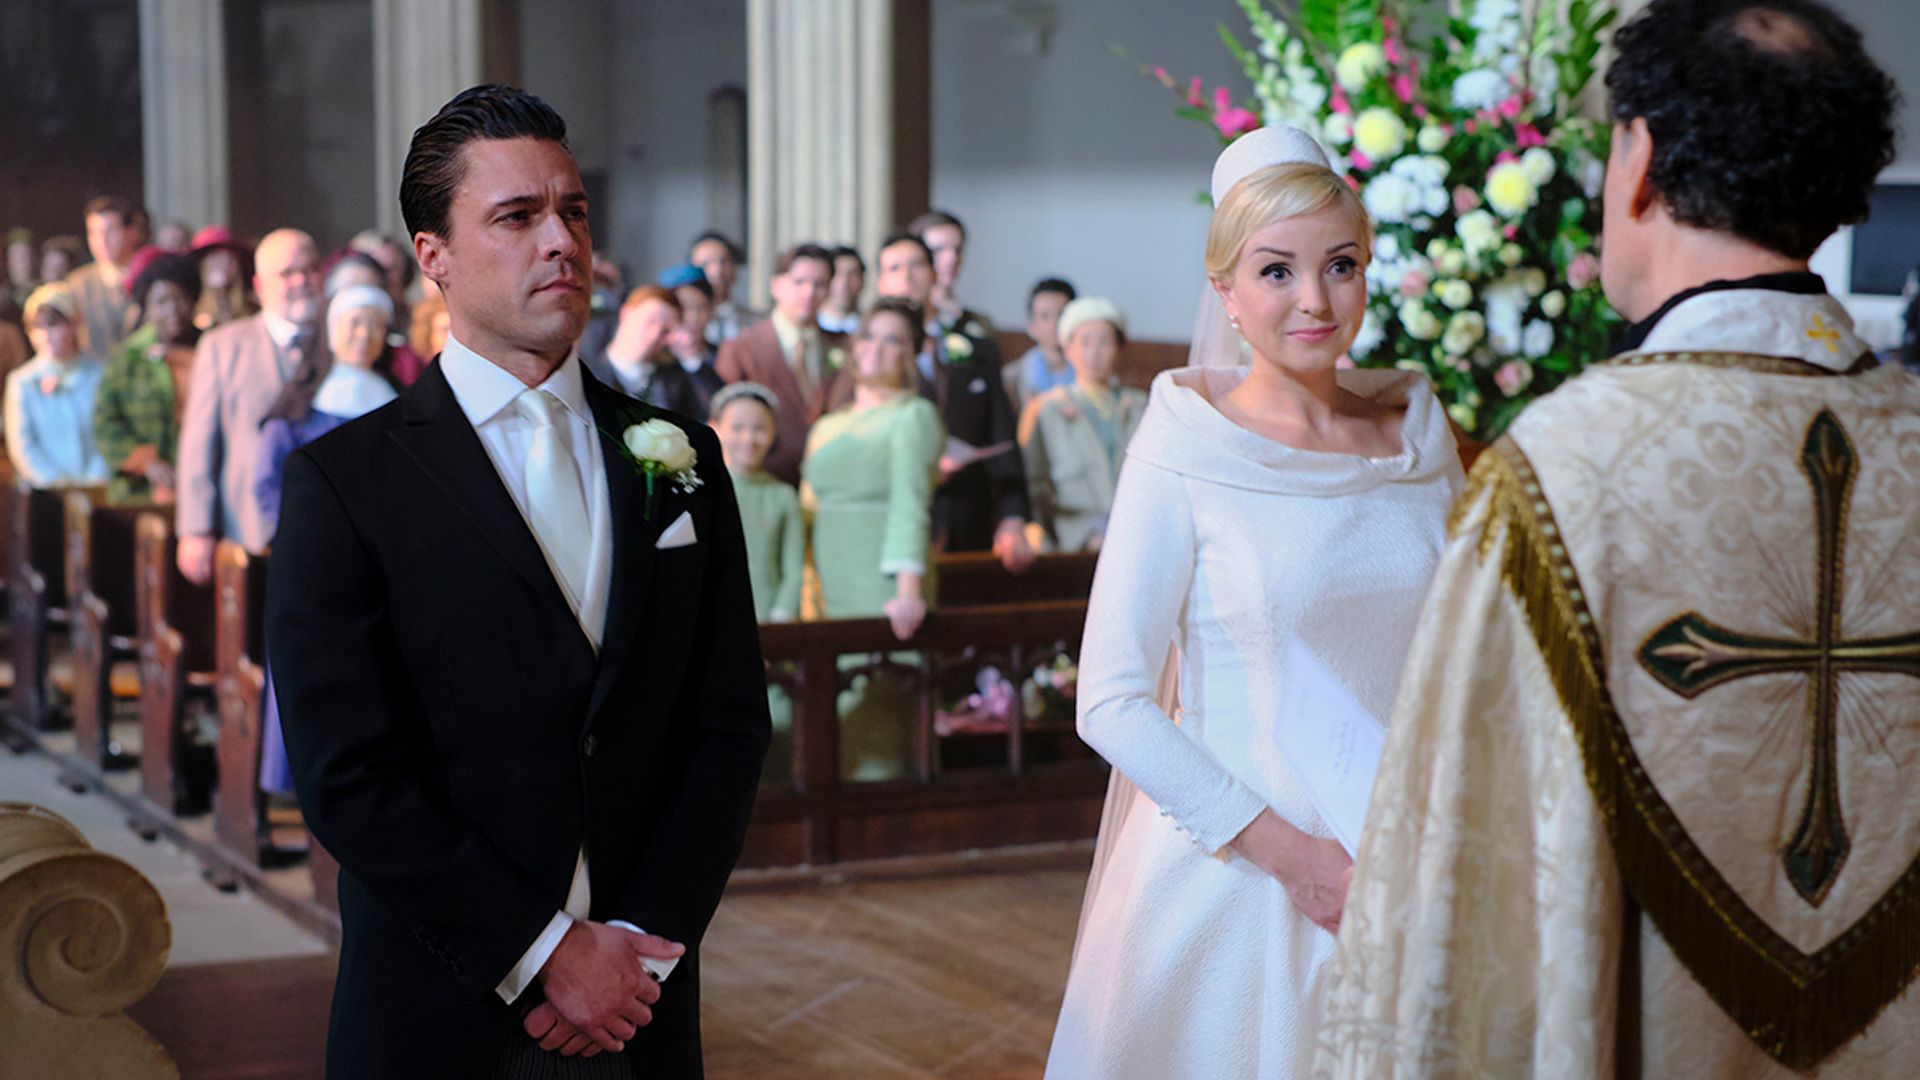 Call the Midwife star reveals 'heartstopping' wedding moment in finale ...